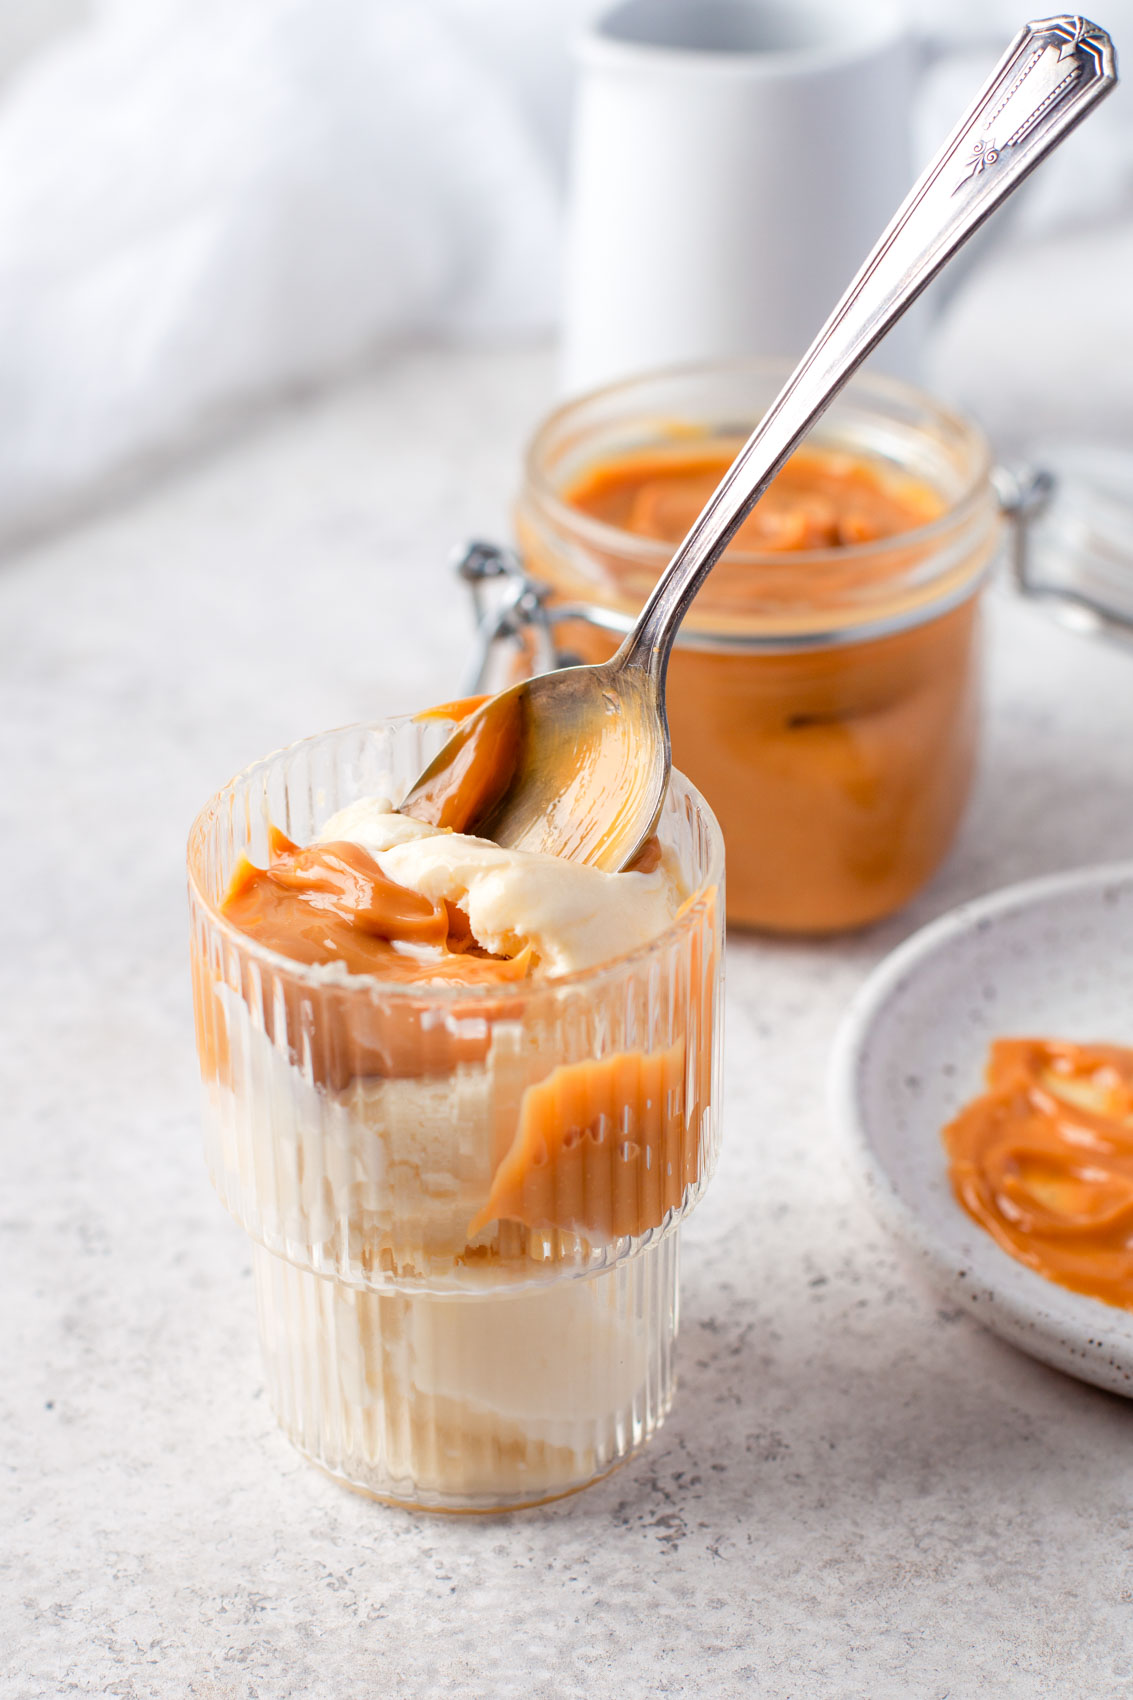 dulce de leche topping on vanilla ice cream with a spoon